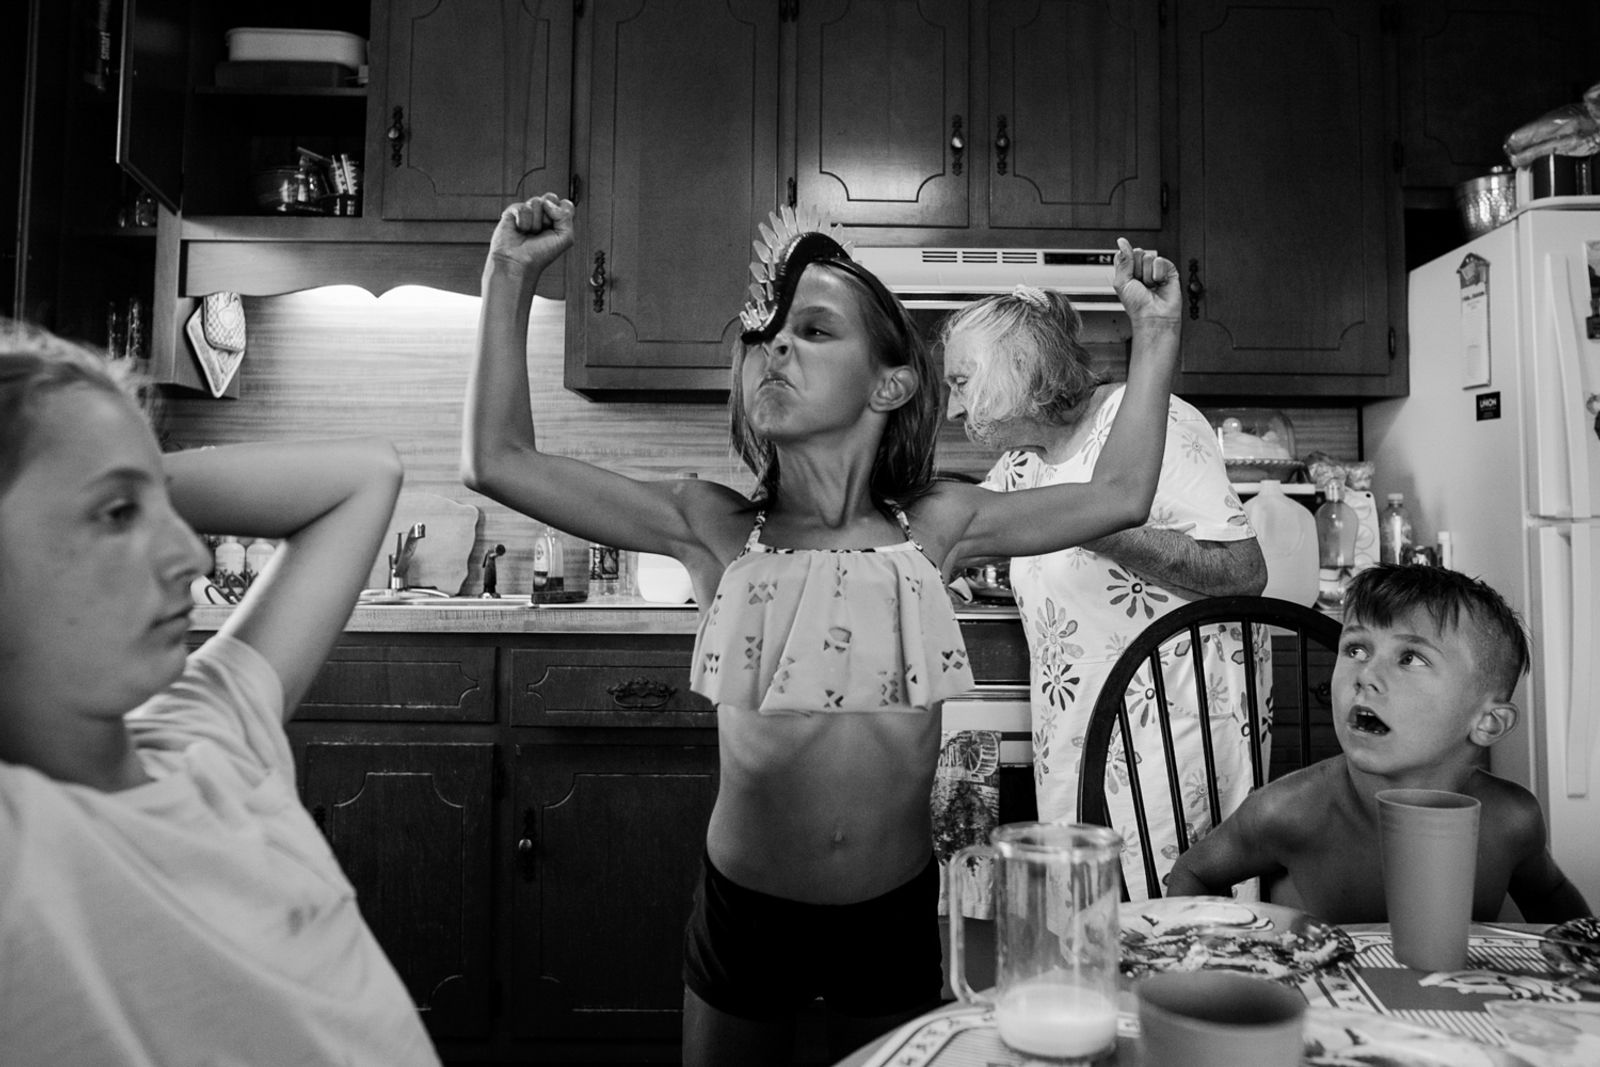 © Angela Ramsey - Rose, my feminist daughter, shows her strength at dinner with grandma.